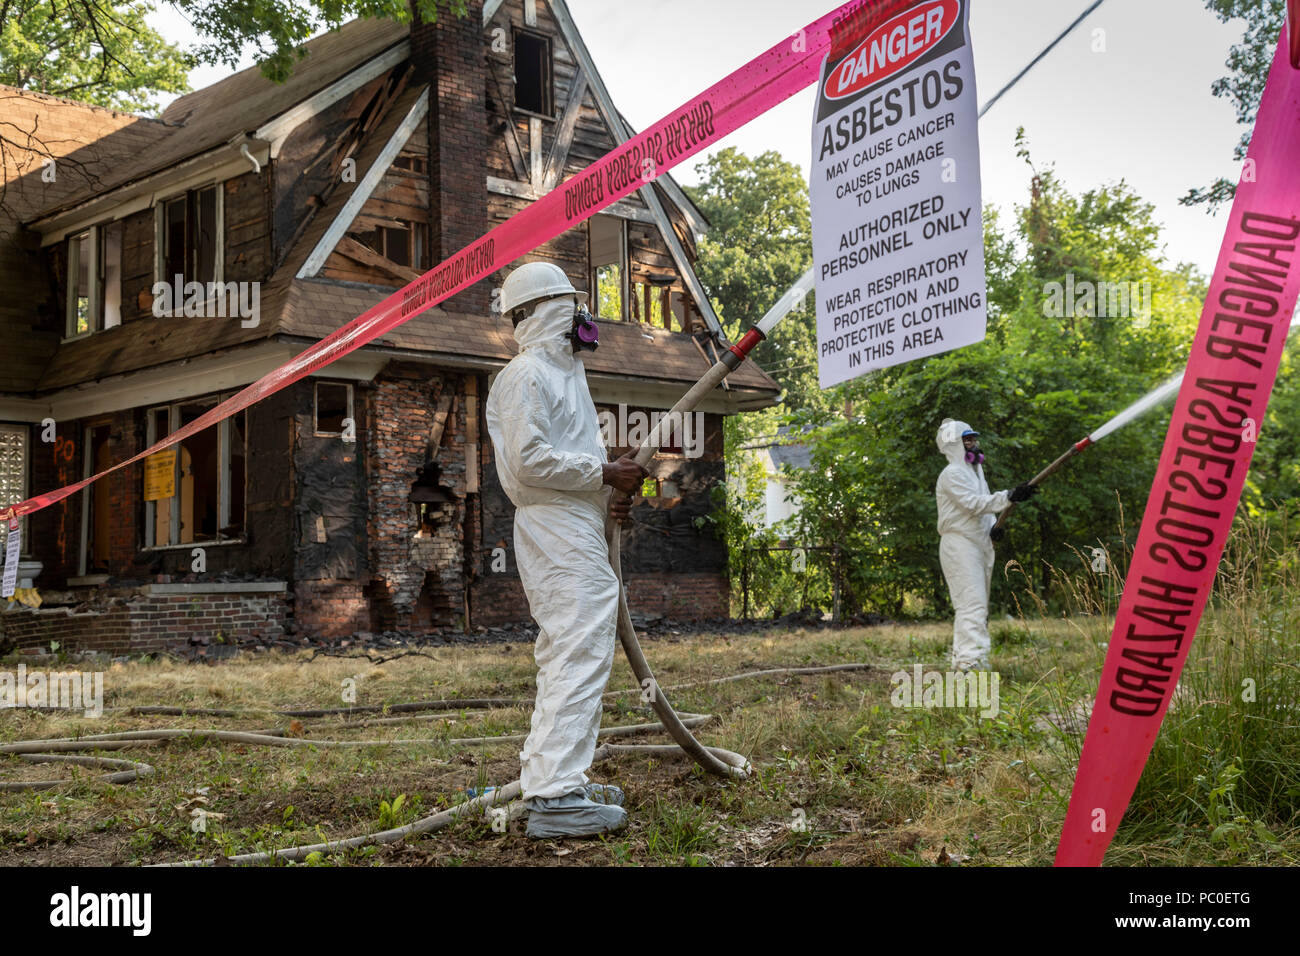 Detroit, Michigan - Using protective clothing to guard against asbestos exposure, workers demolish abandoned houses. They spray water on the buildings Stock Photo